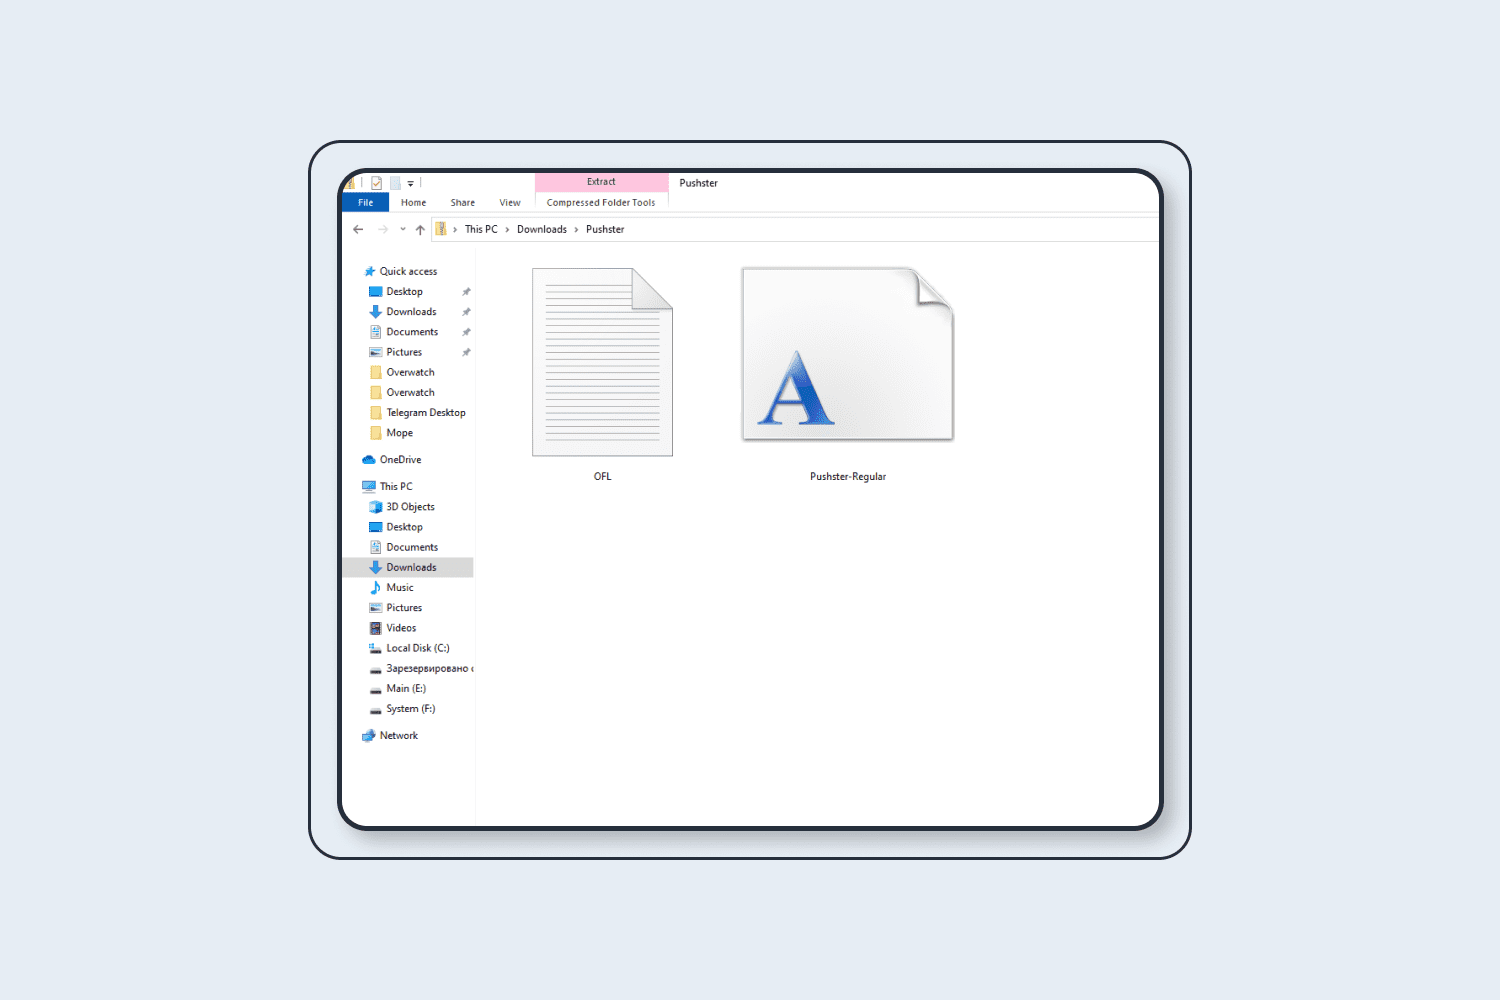 Download all the necessary files with fonts on your computer and, if necessary, unzip them